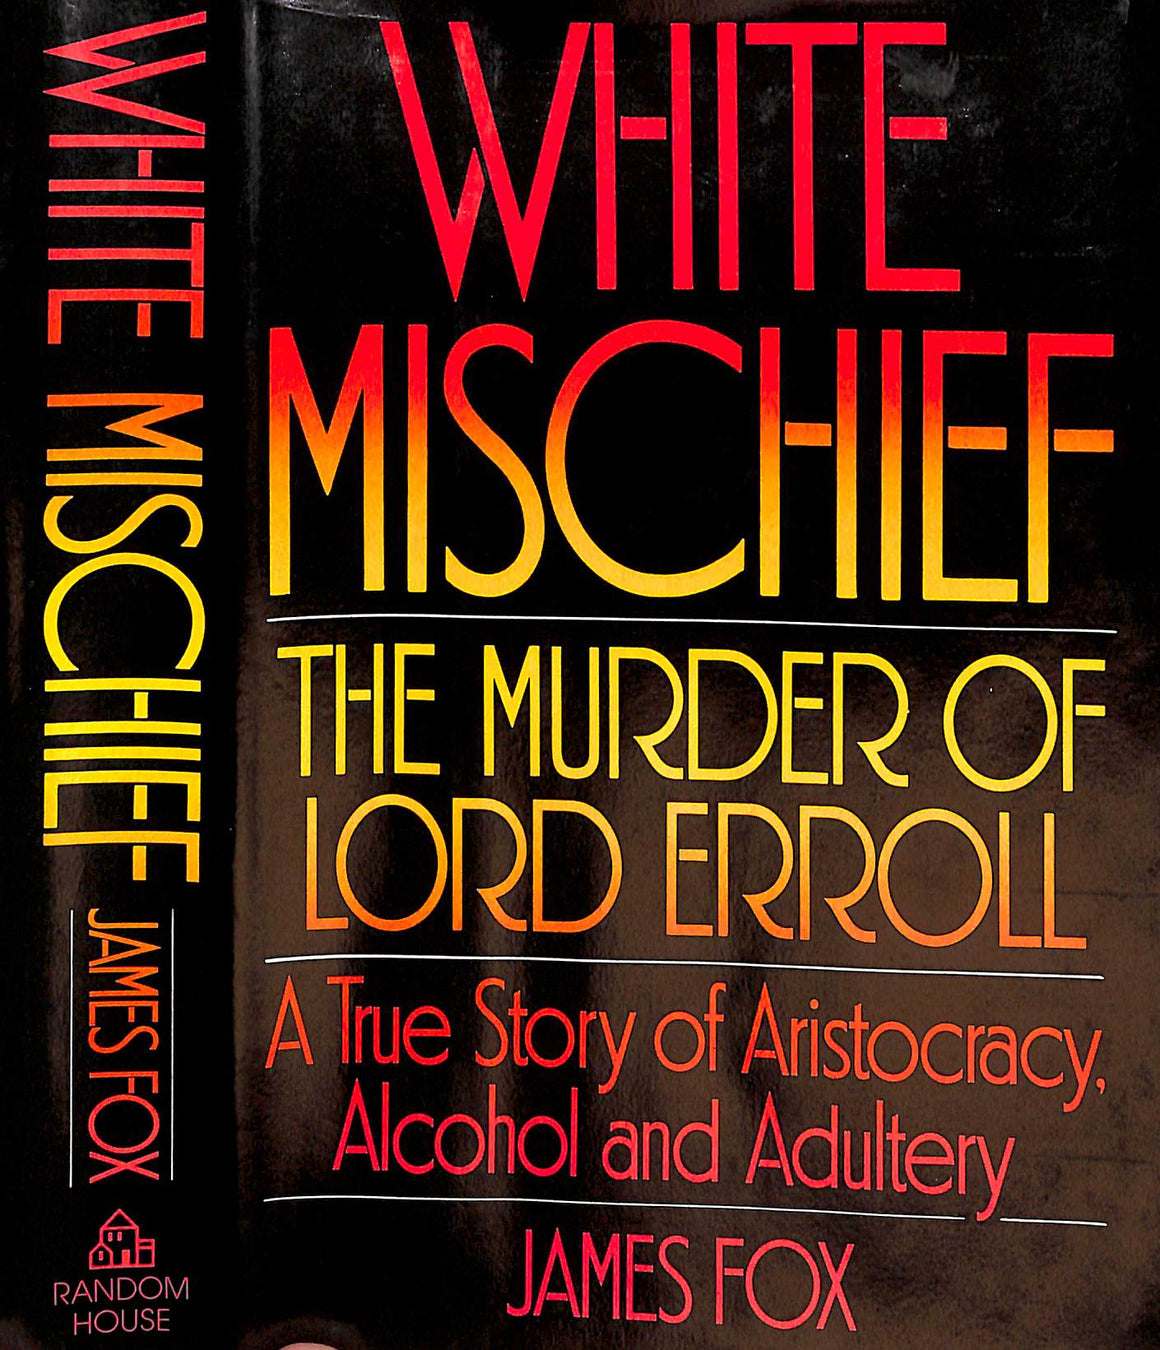 "White Mischief - The Murder Of Lord Erroll: True Story Of Aristocracy, Alcohol And Adultery" 1982 FOX, James (SOLD)